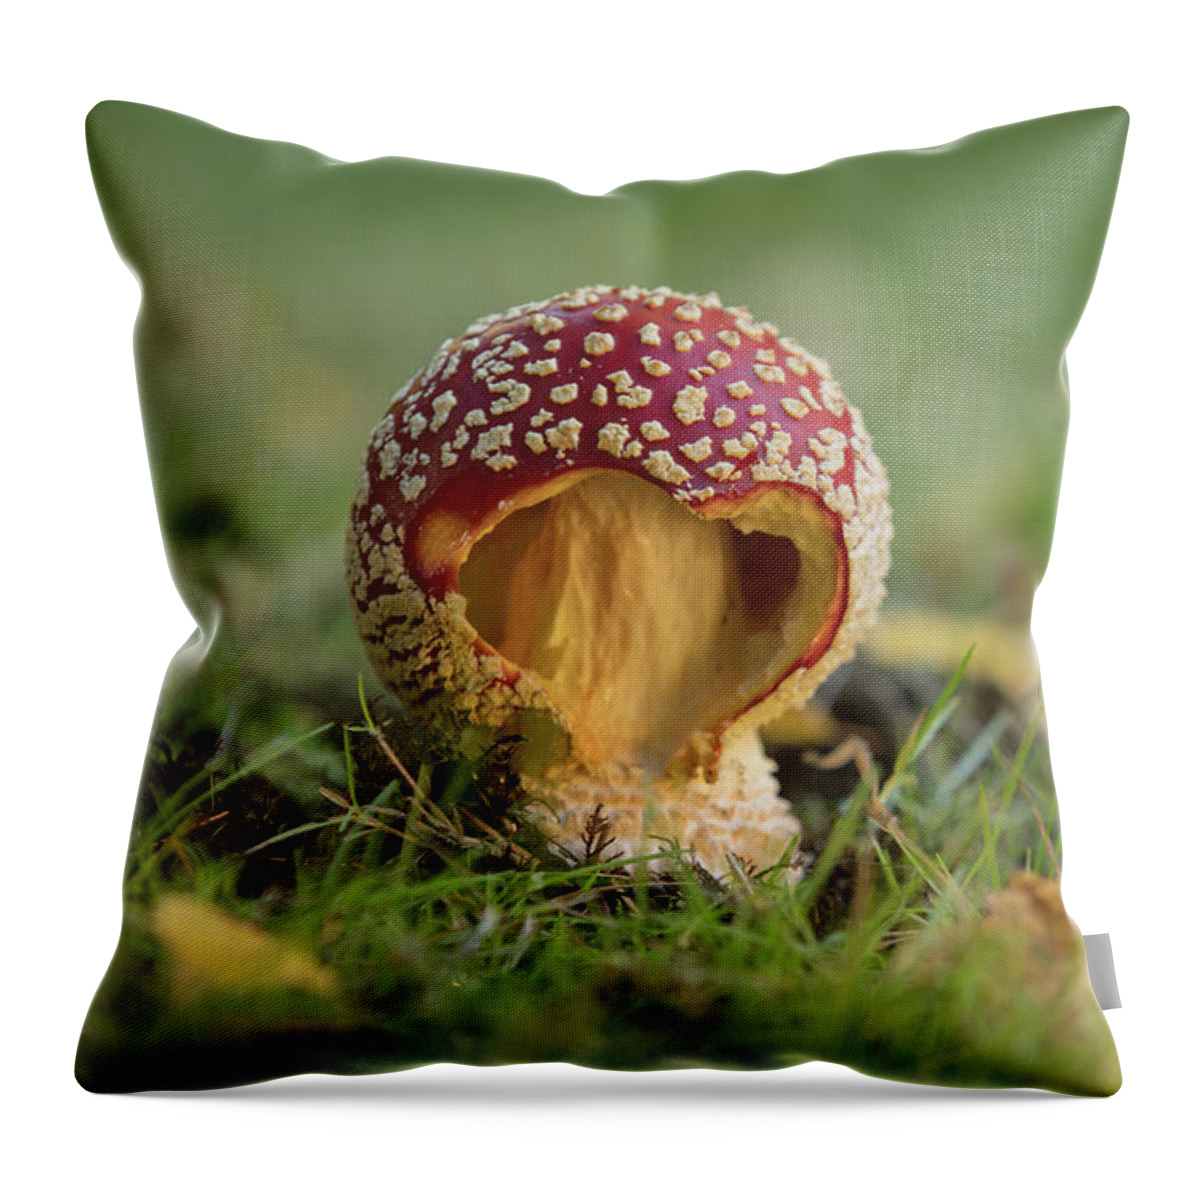 Mushroom Throw Pillow featuring the photograph Elf's House by Mary Jo Allen